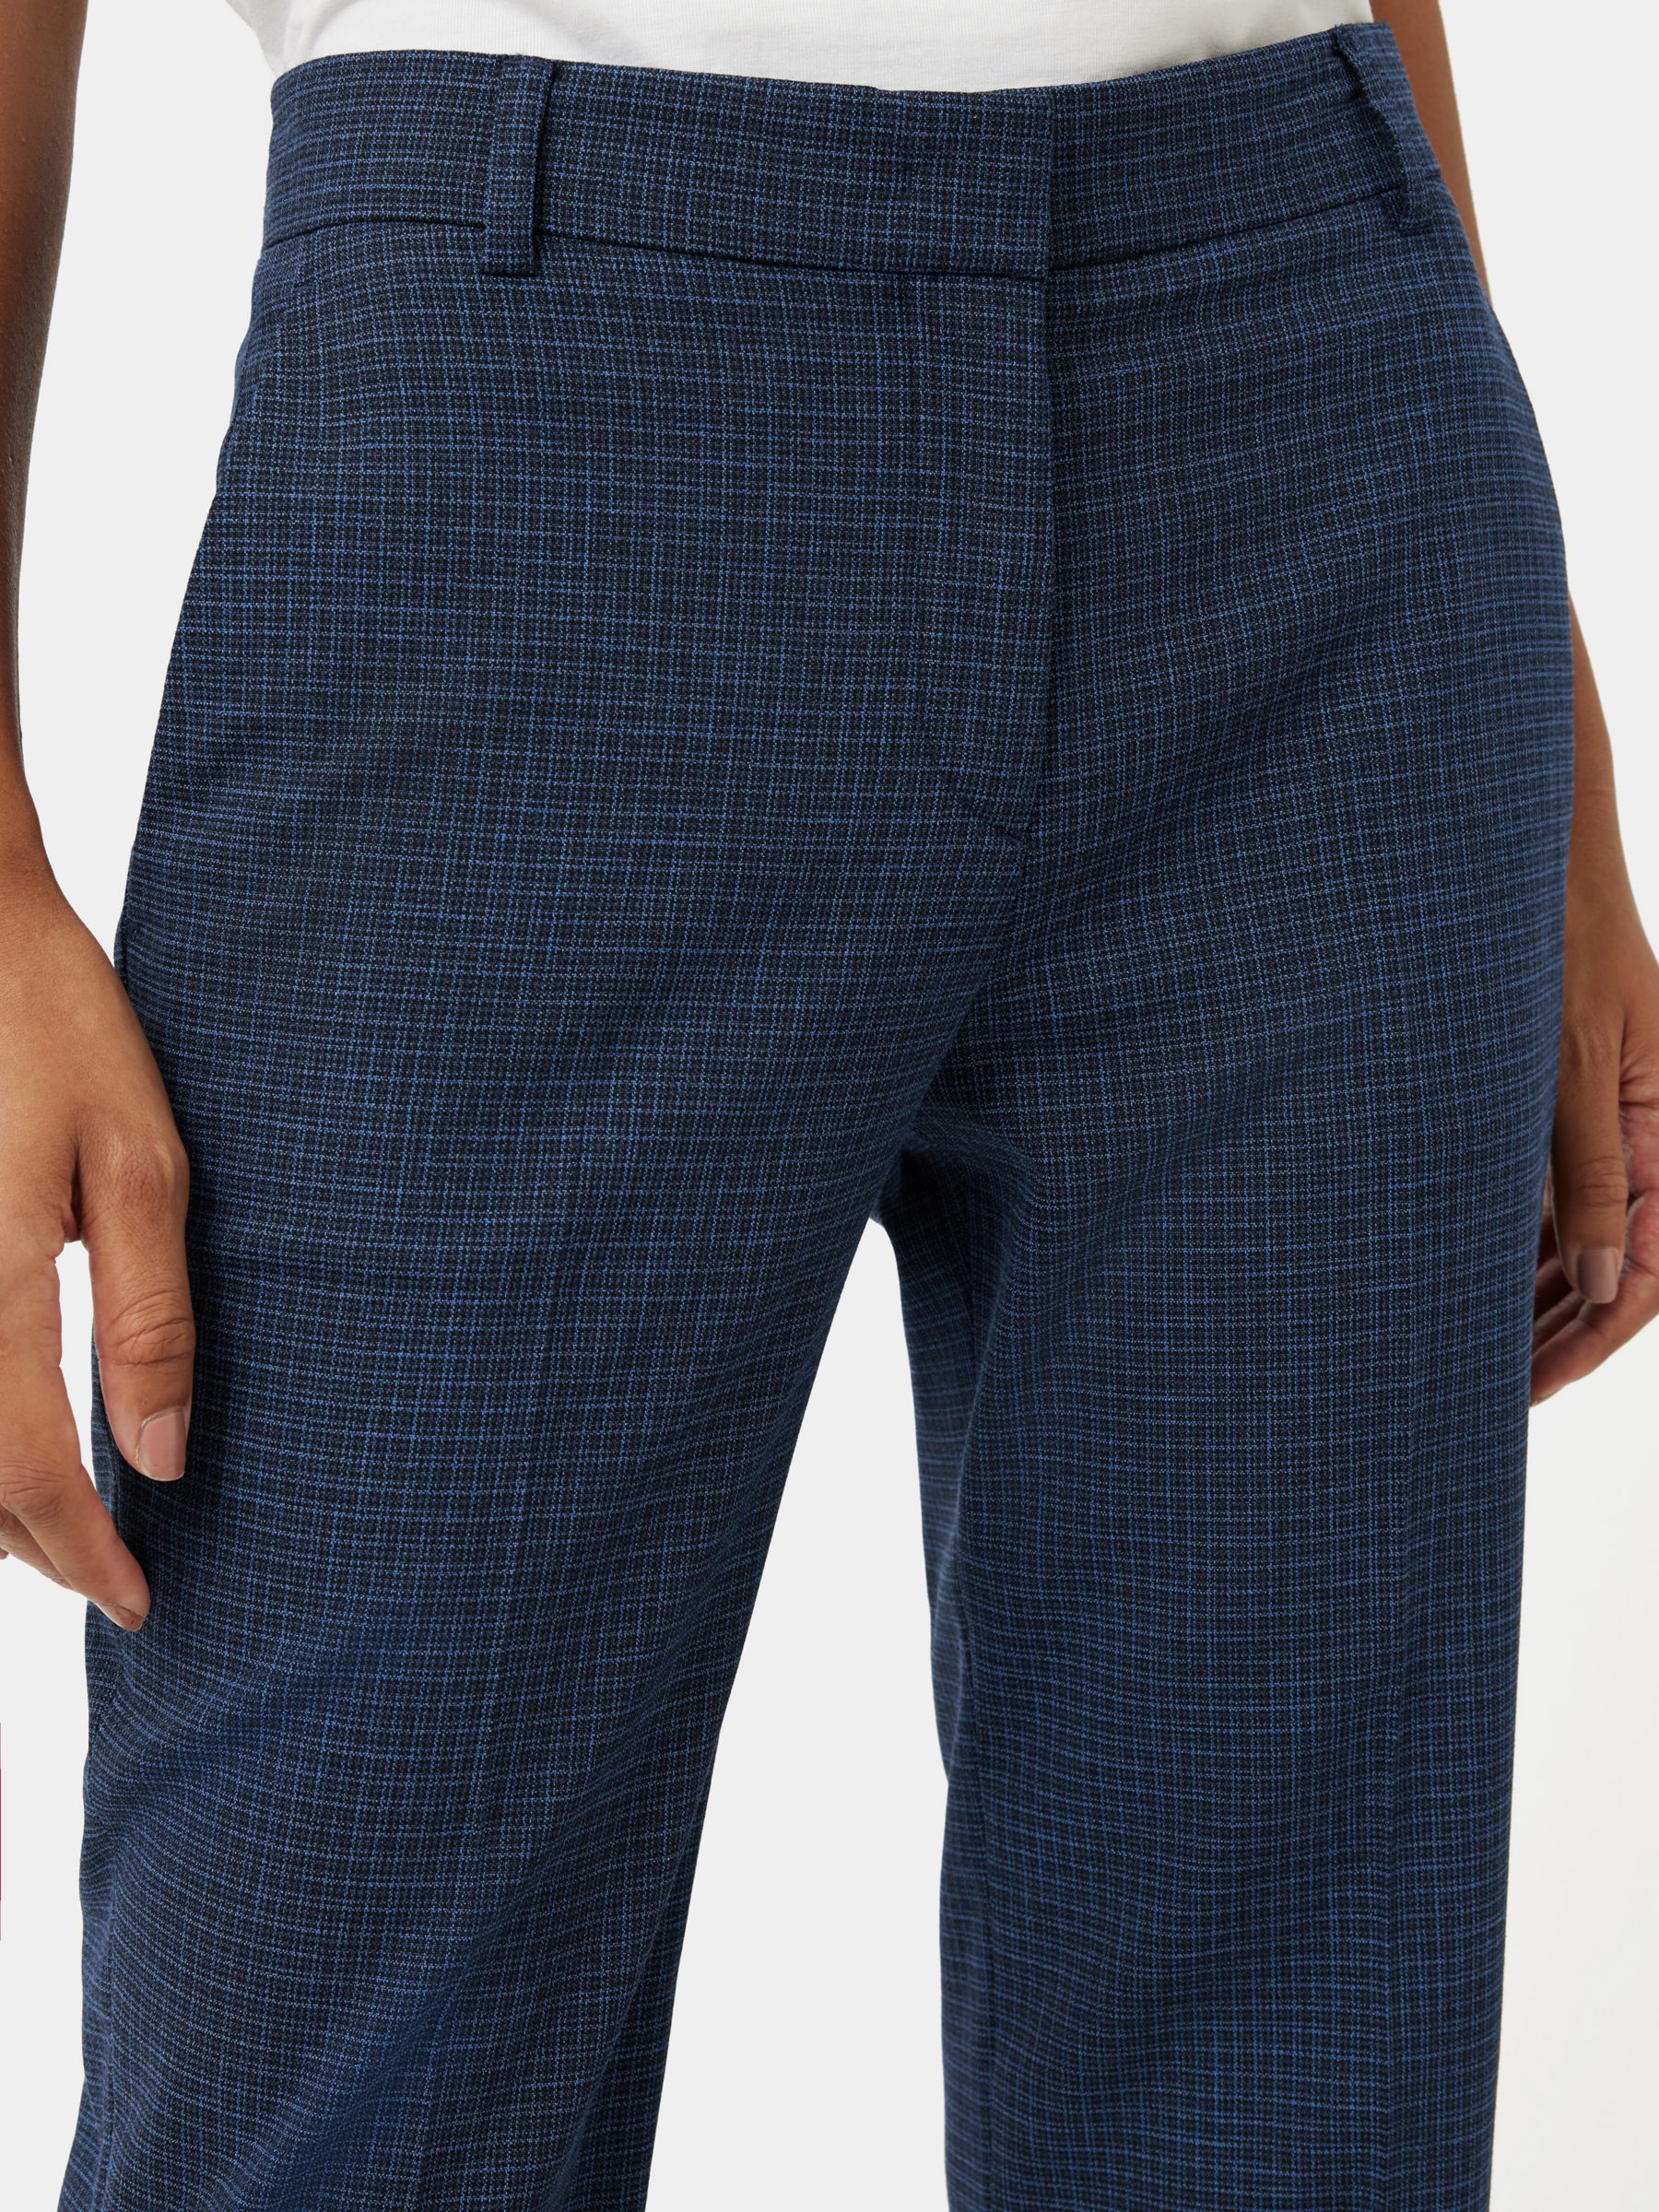 Jigsaw Palmer Gingham Check Trousers, Navy, 8